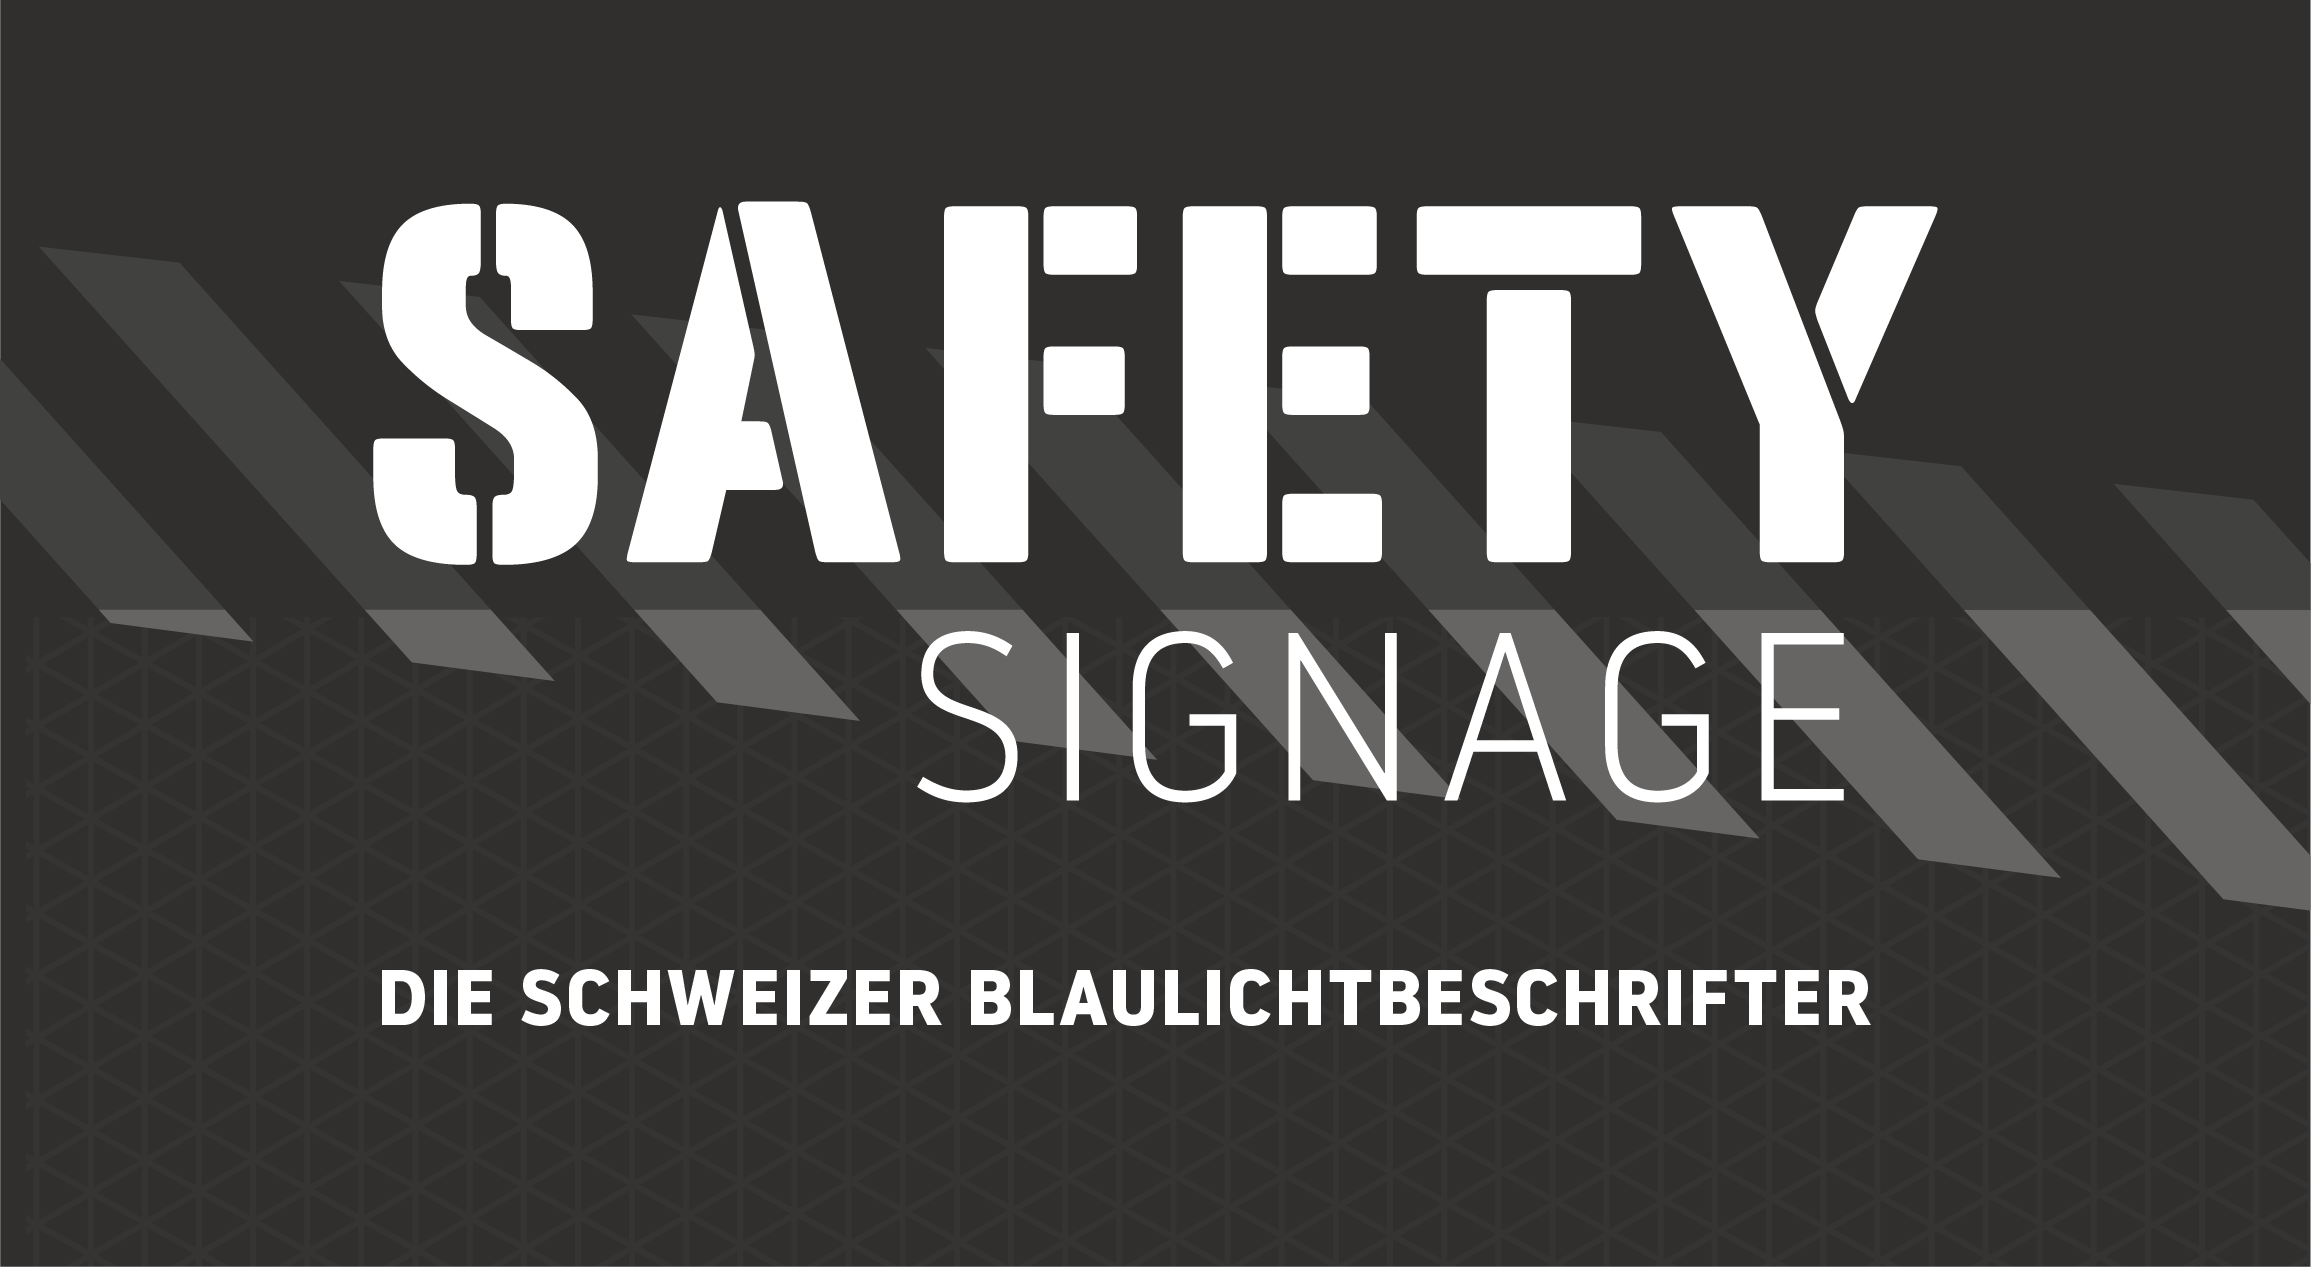 SAFETY-SIGNAGE by REKLAME-TECHNIK AG